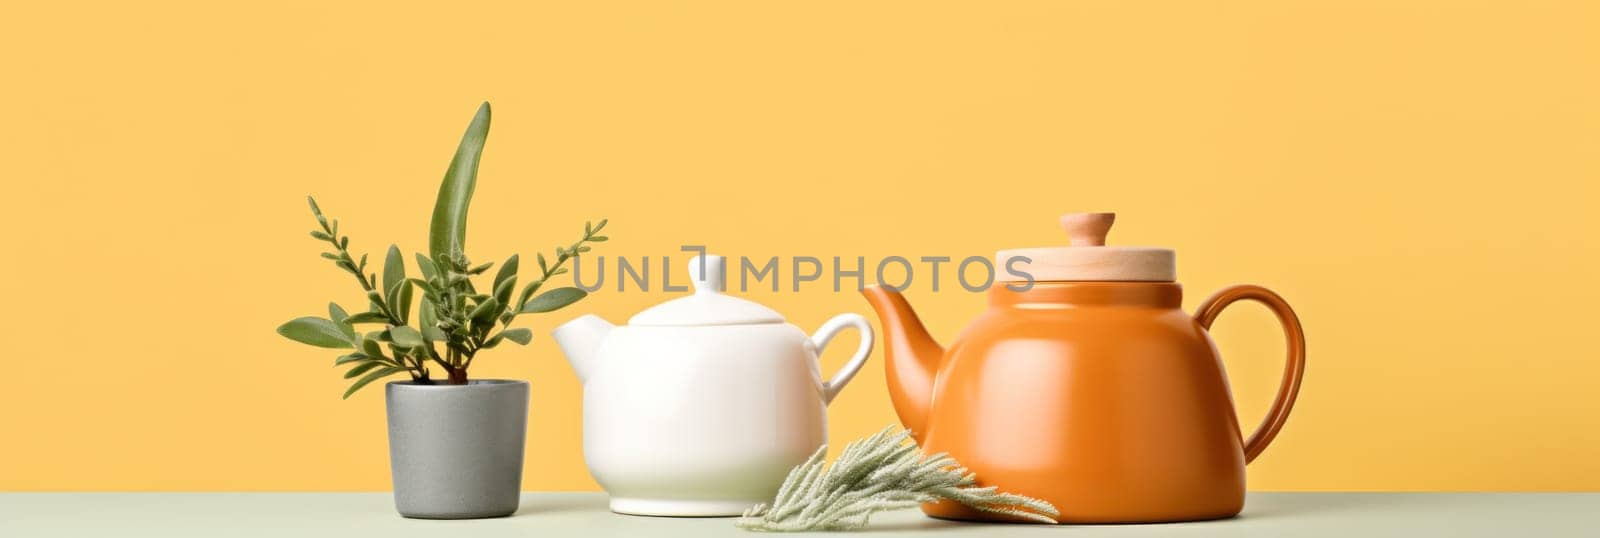 A table with a potted plant and a teapot on it, AI by starush